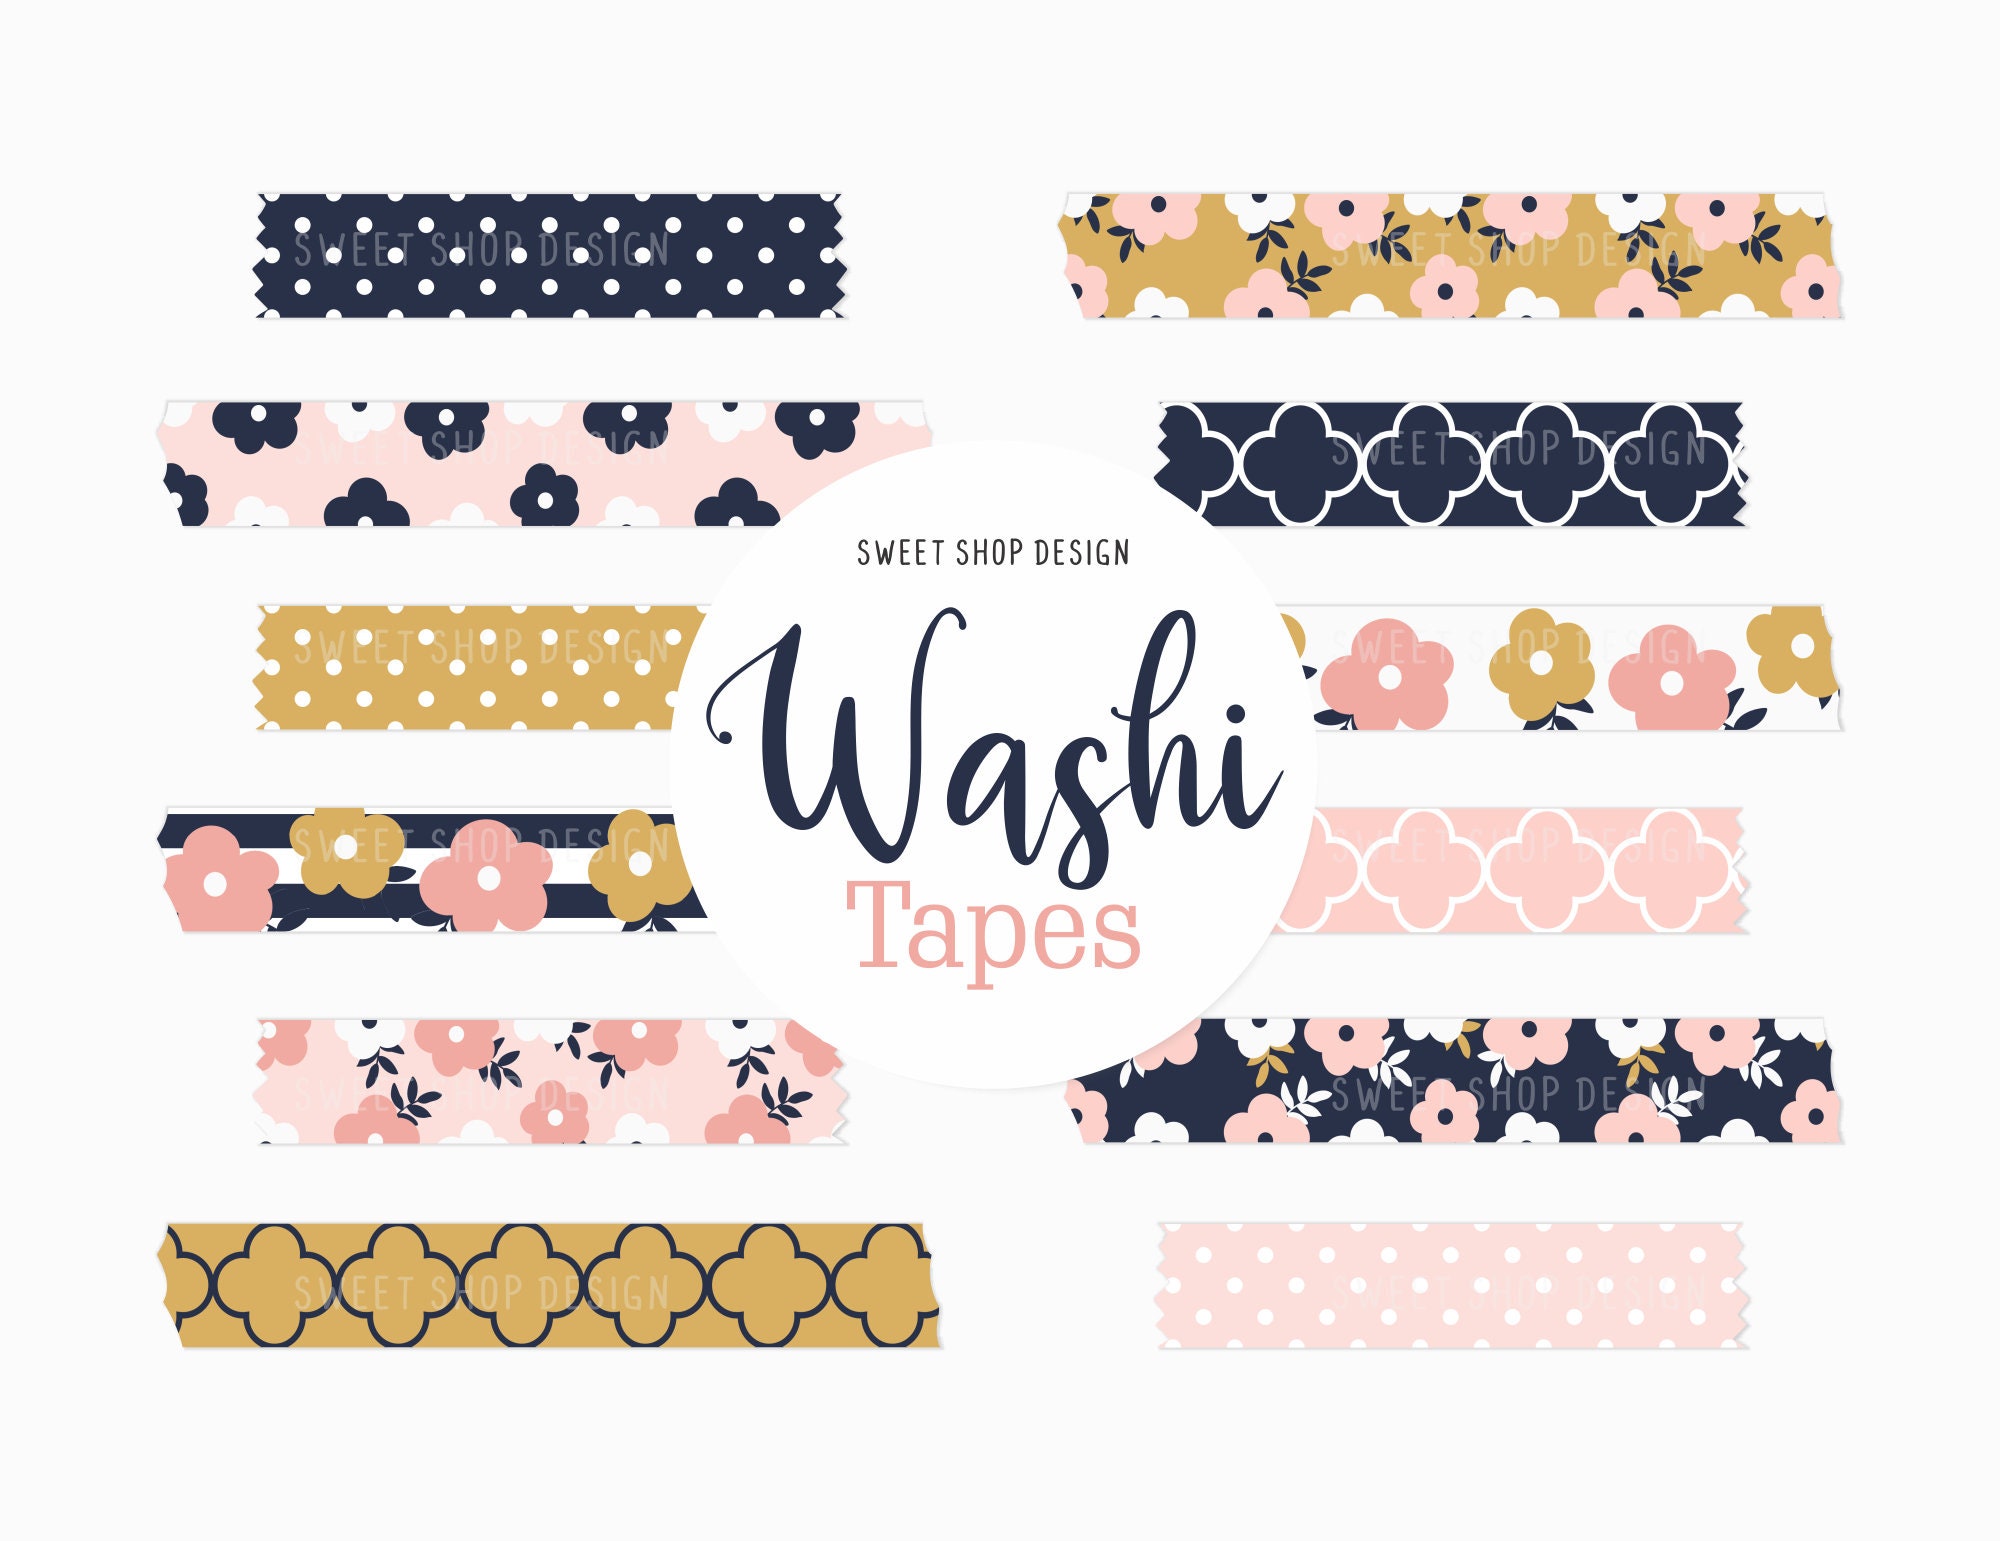 Digital Washi Tape Clipart BOHO RAINBOWS, Graphics with Rainbows Stripes  Dots For Digital Planner, Goodnotes